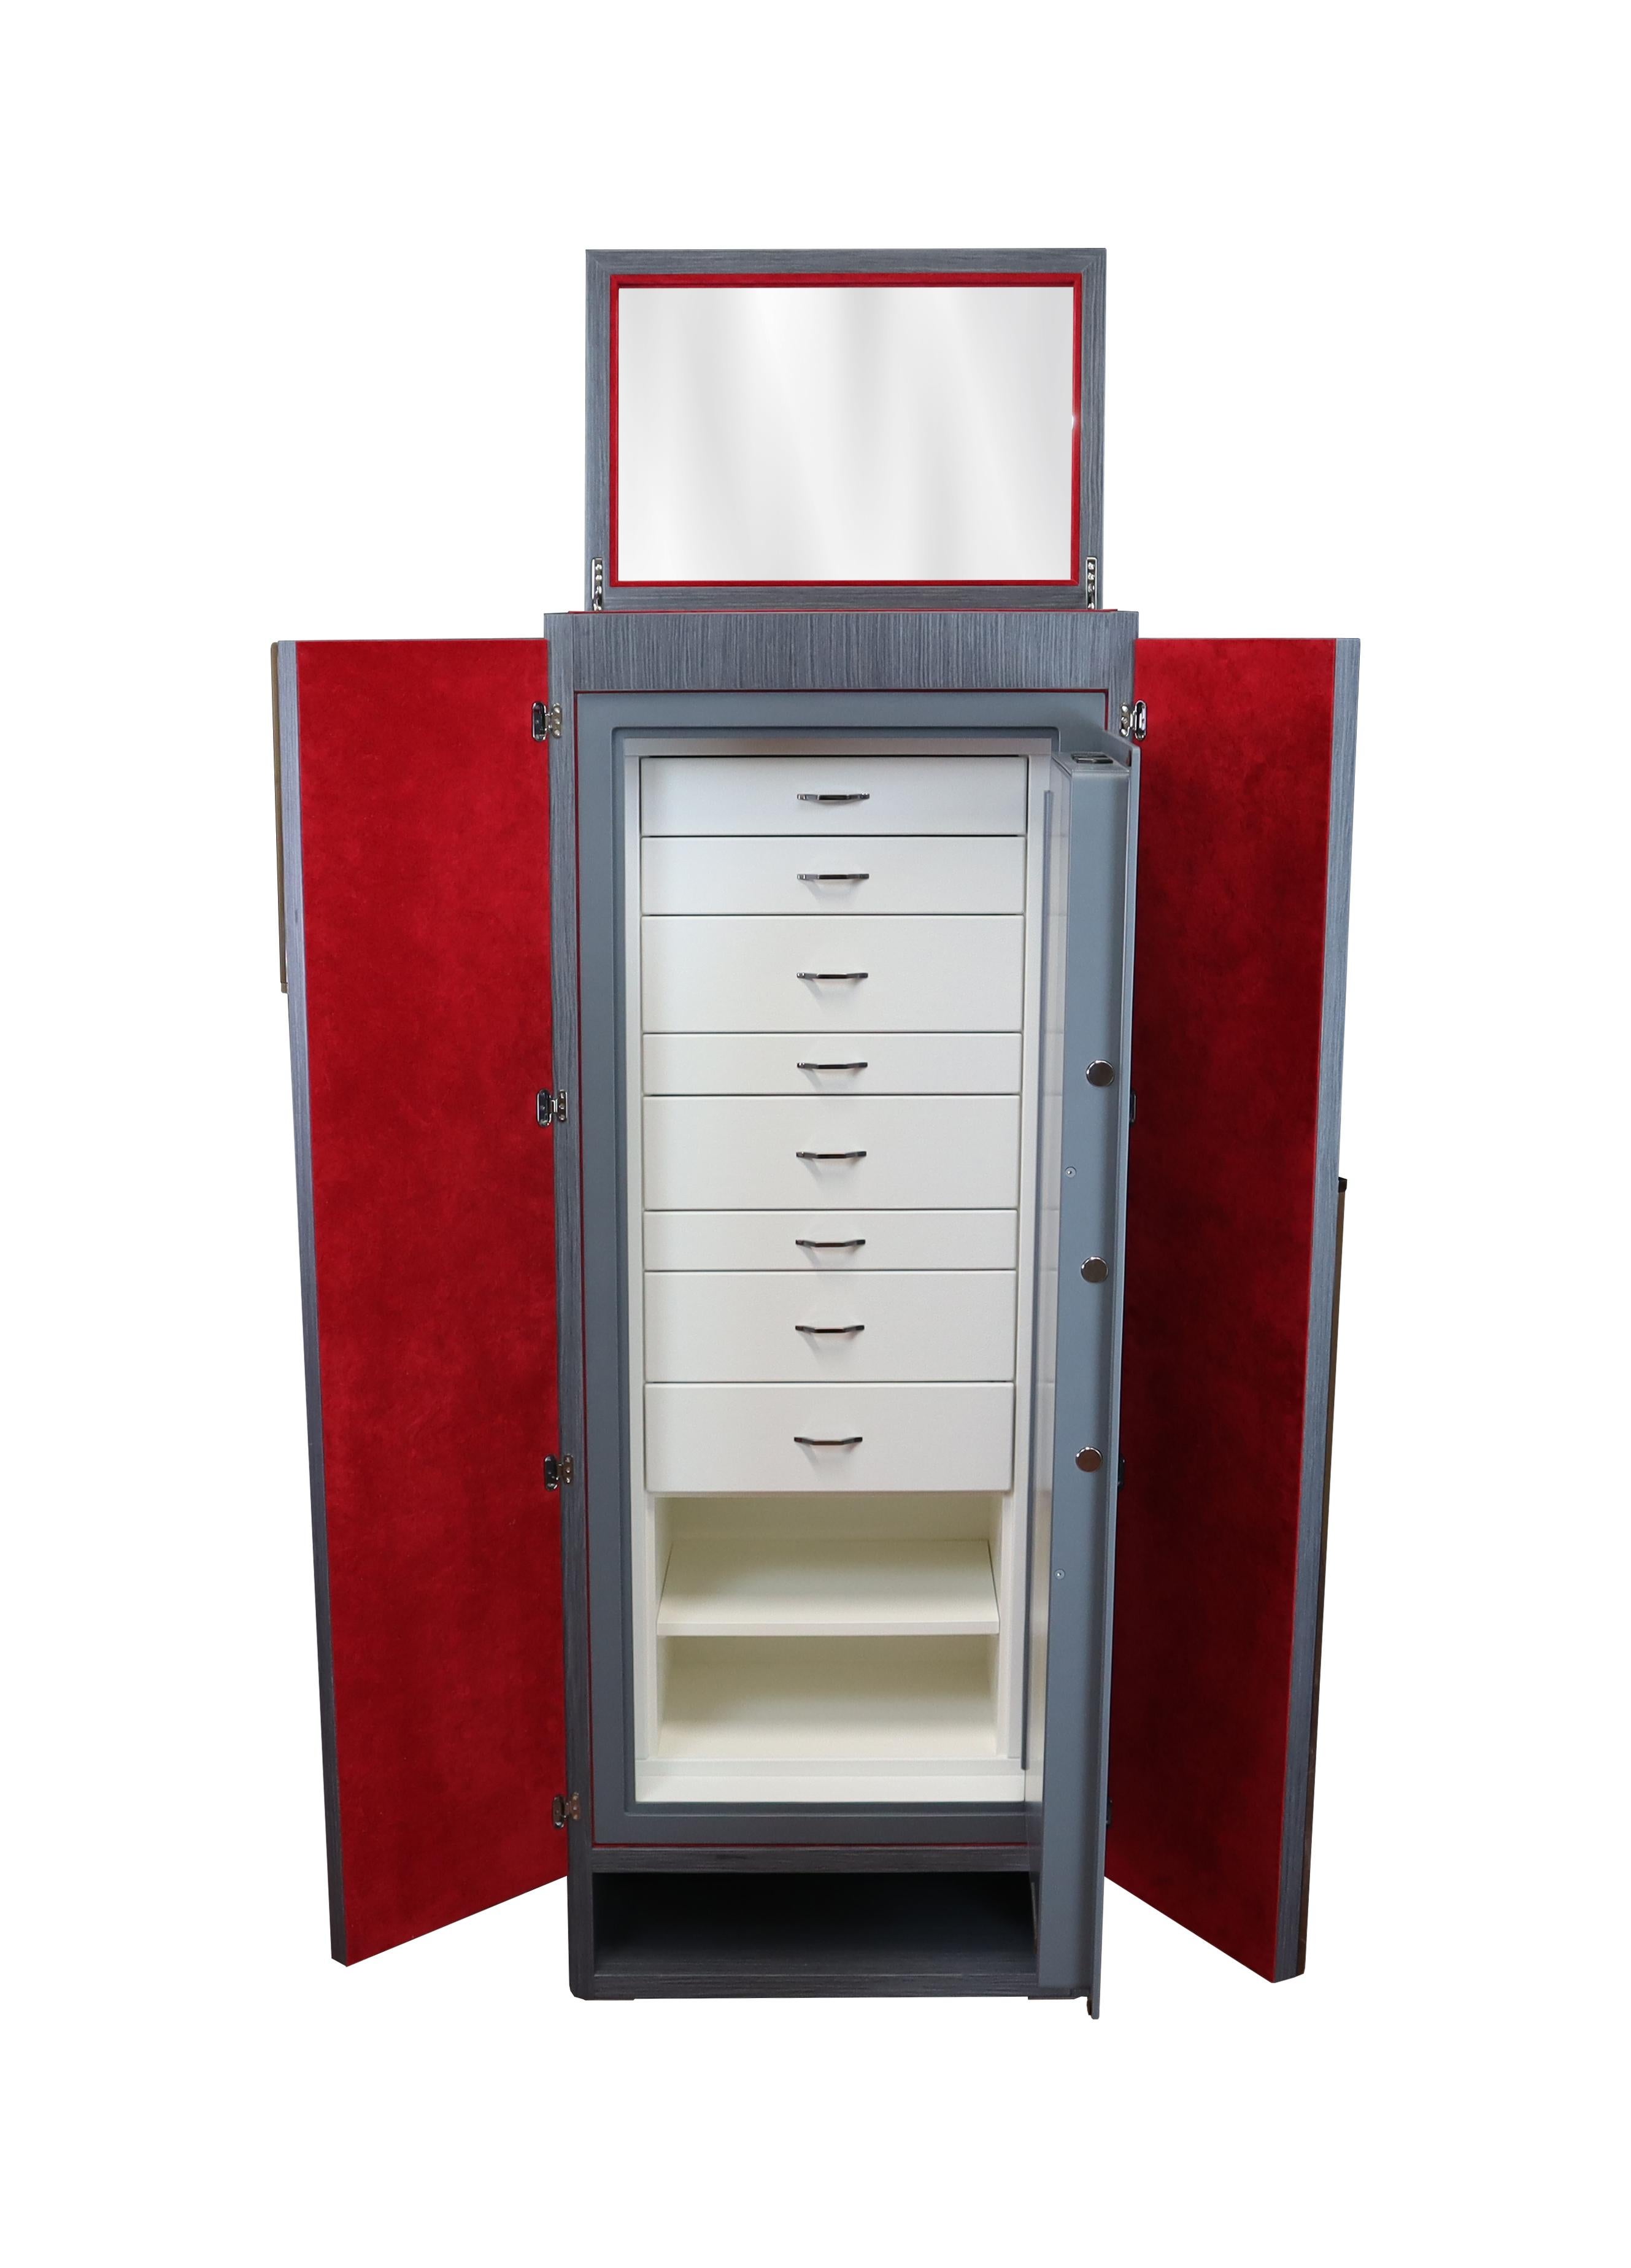 Armored jewelry chest in matte gray oak, ruthenium accessories. Jewelry drawers with fronts covered with white leather, inside lined with red ultrasuede. Interior safe color gray, matte finish.